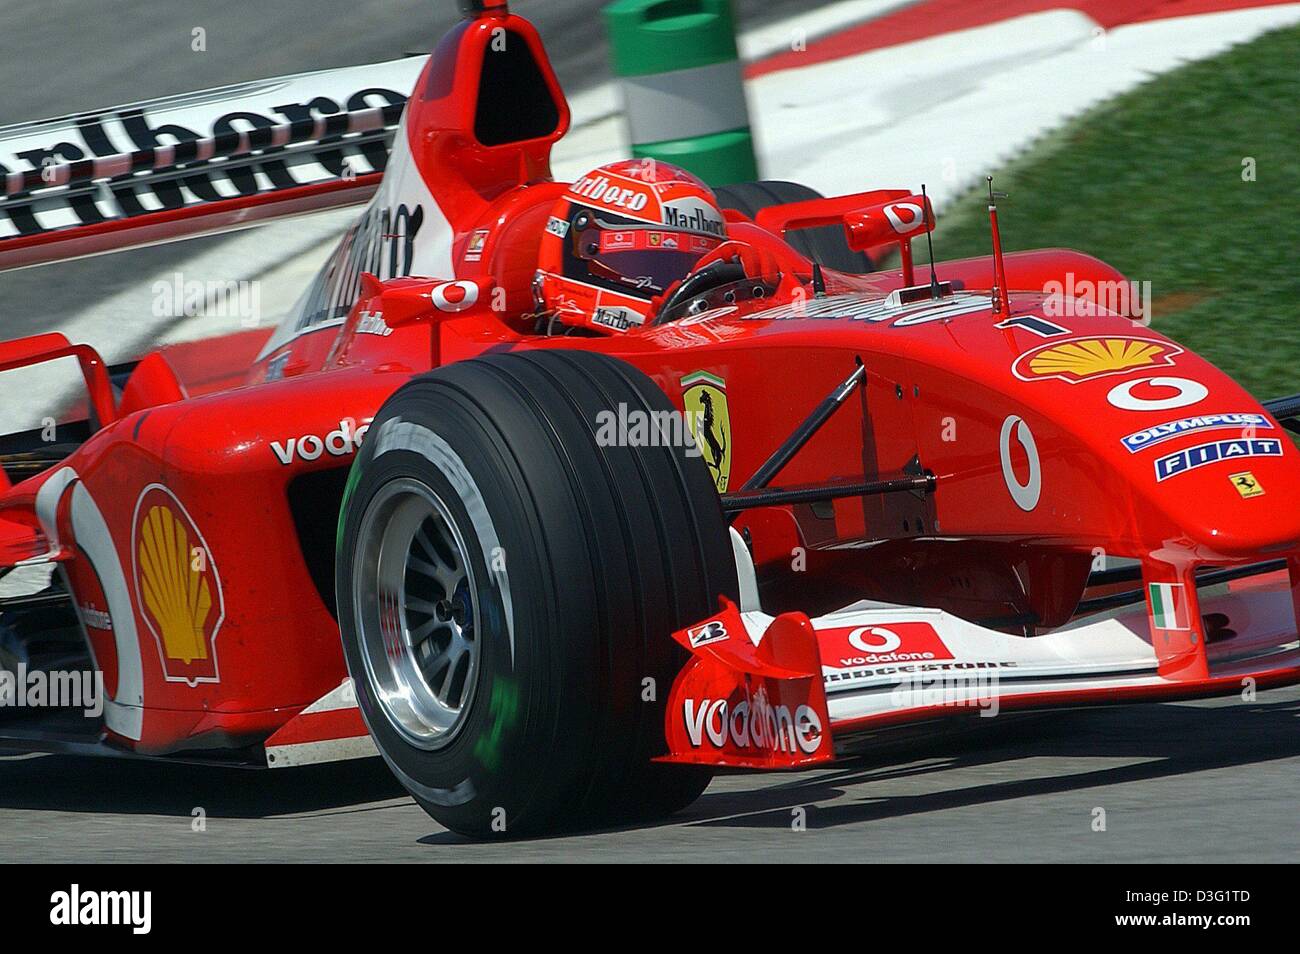 (dpa) - German formula one champion Michael Schumacher (Ferrari) drives with his boliden on the formula one race track in Kuala Lumpur, Malaysia, 21 March 2003. Schumacher drives the 5,543 kilometer race track in 1:34.980 minutes and achives best time during the free training round. The formula one grand prix race in Malaysia is the second race of the season and starts on 23 March  Stock Photo